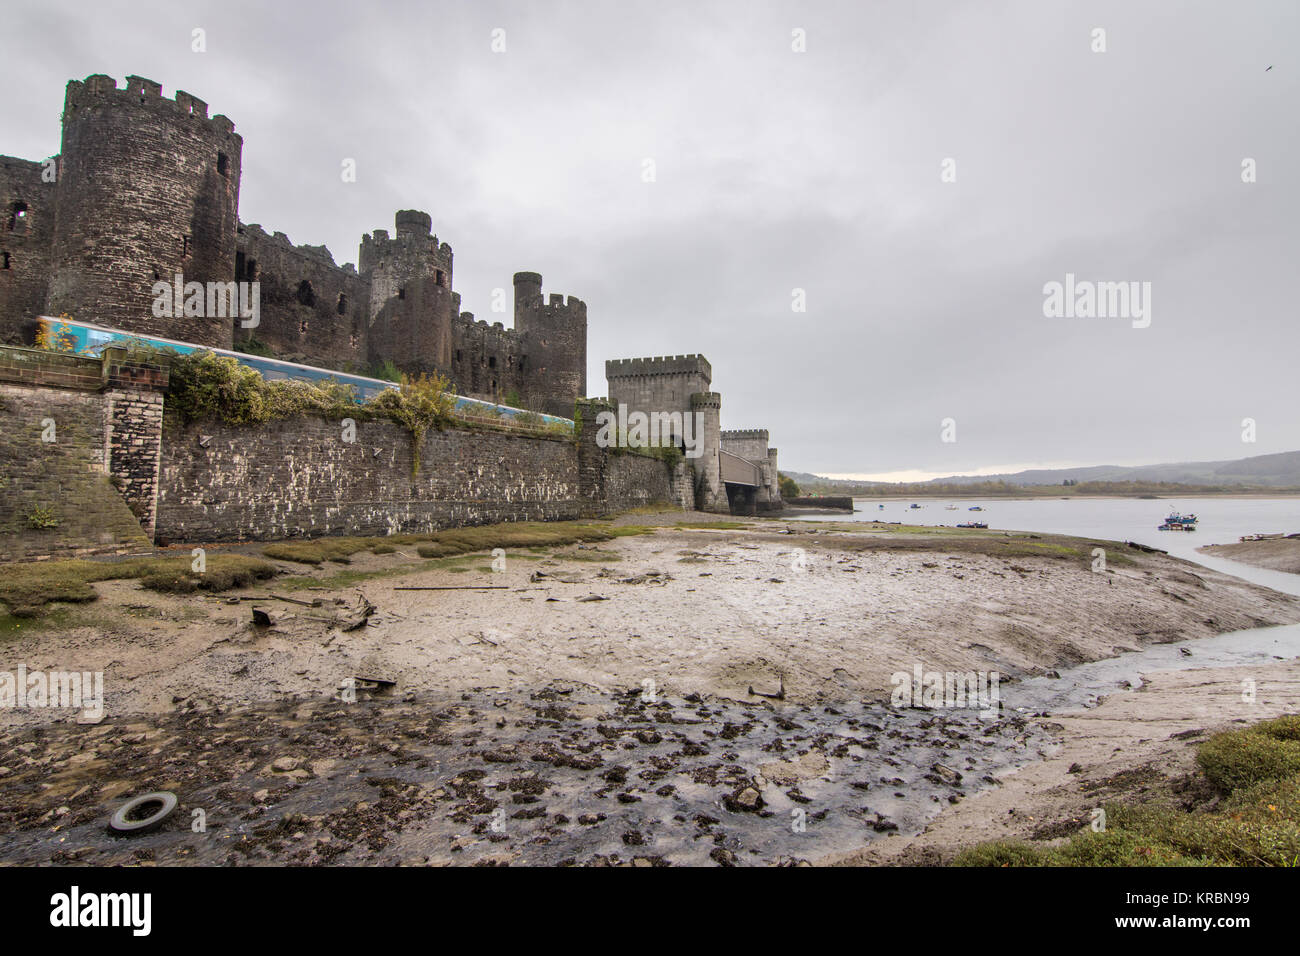 Conwy, Wales, UK - November 5, 2015: An Arriva Trains Wales diesel passenger train passes Conwy Castle on the estuary of the River Conwy in North Wale Stock Photo